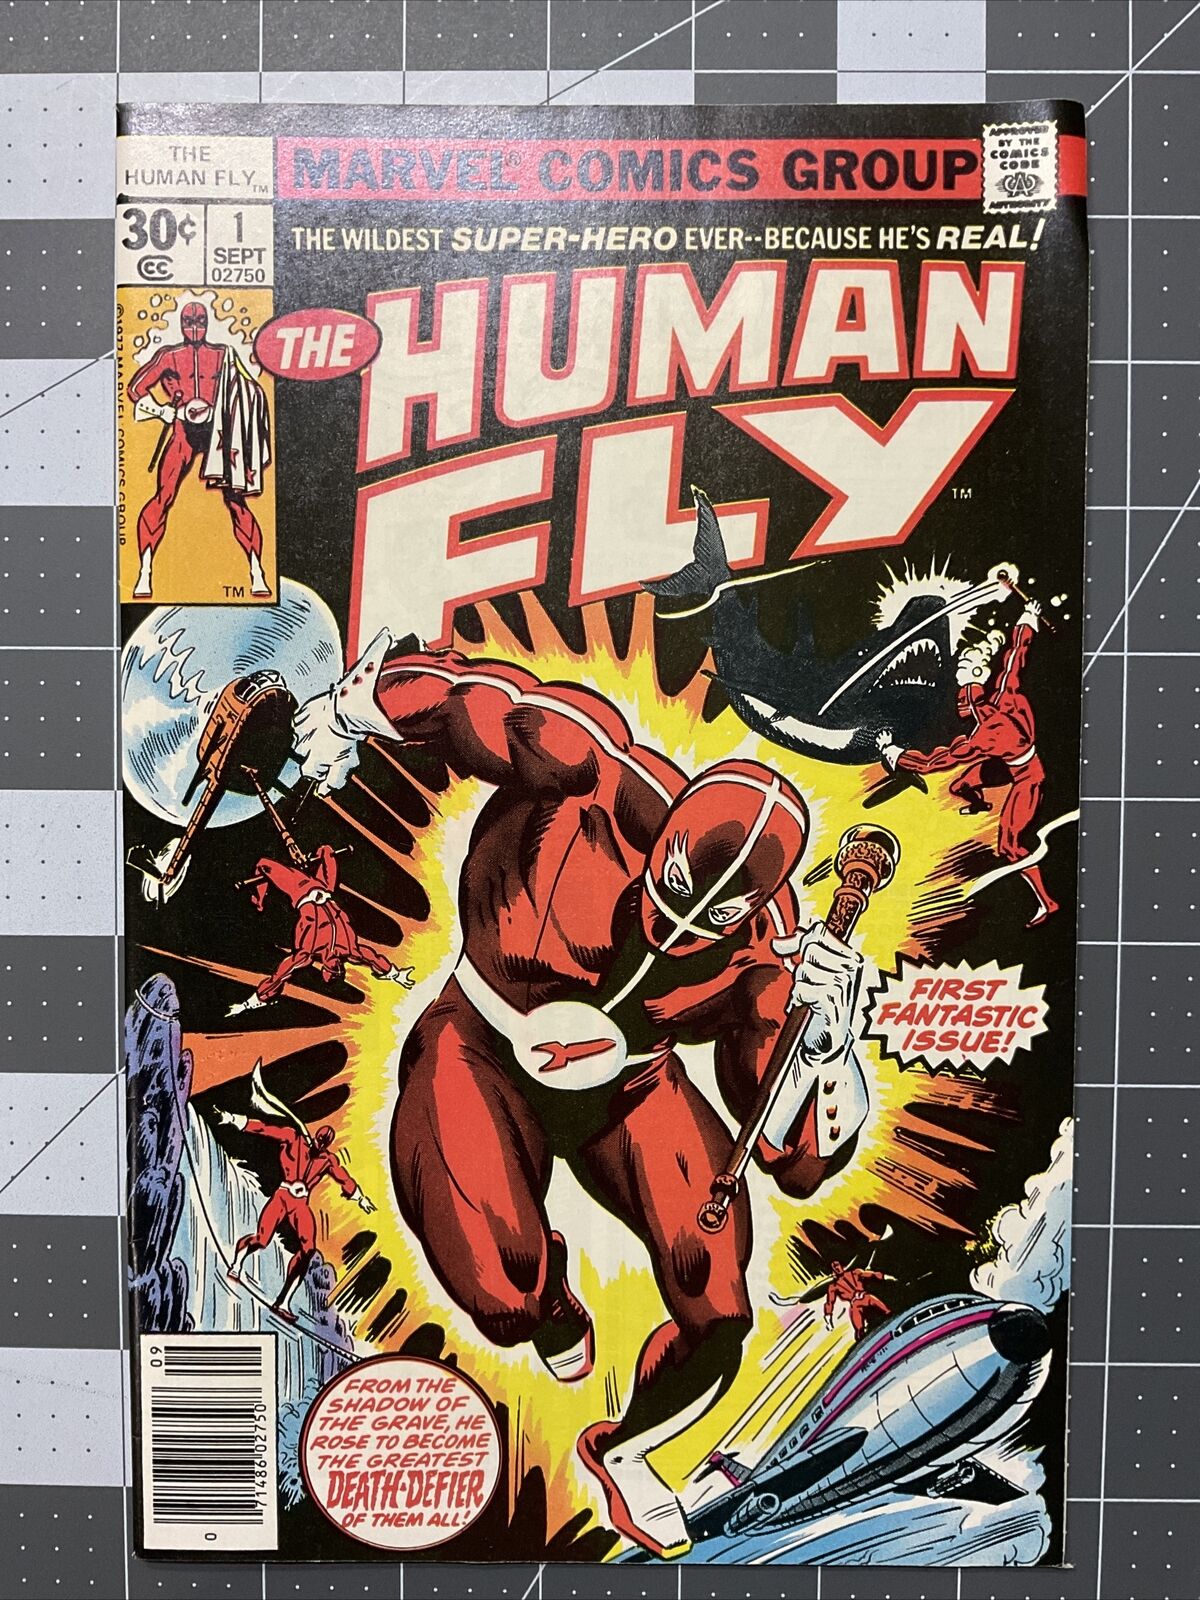 The Human Fly #1 1st Issue & 1st Appearance FN+ Marvel Comics 1977